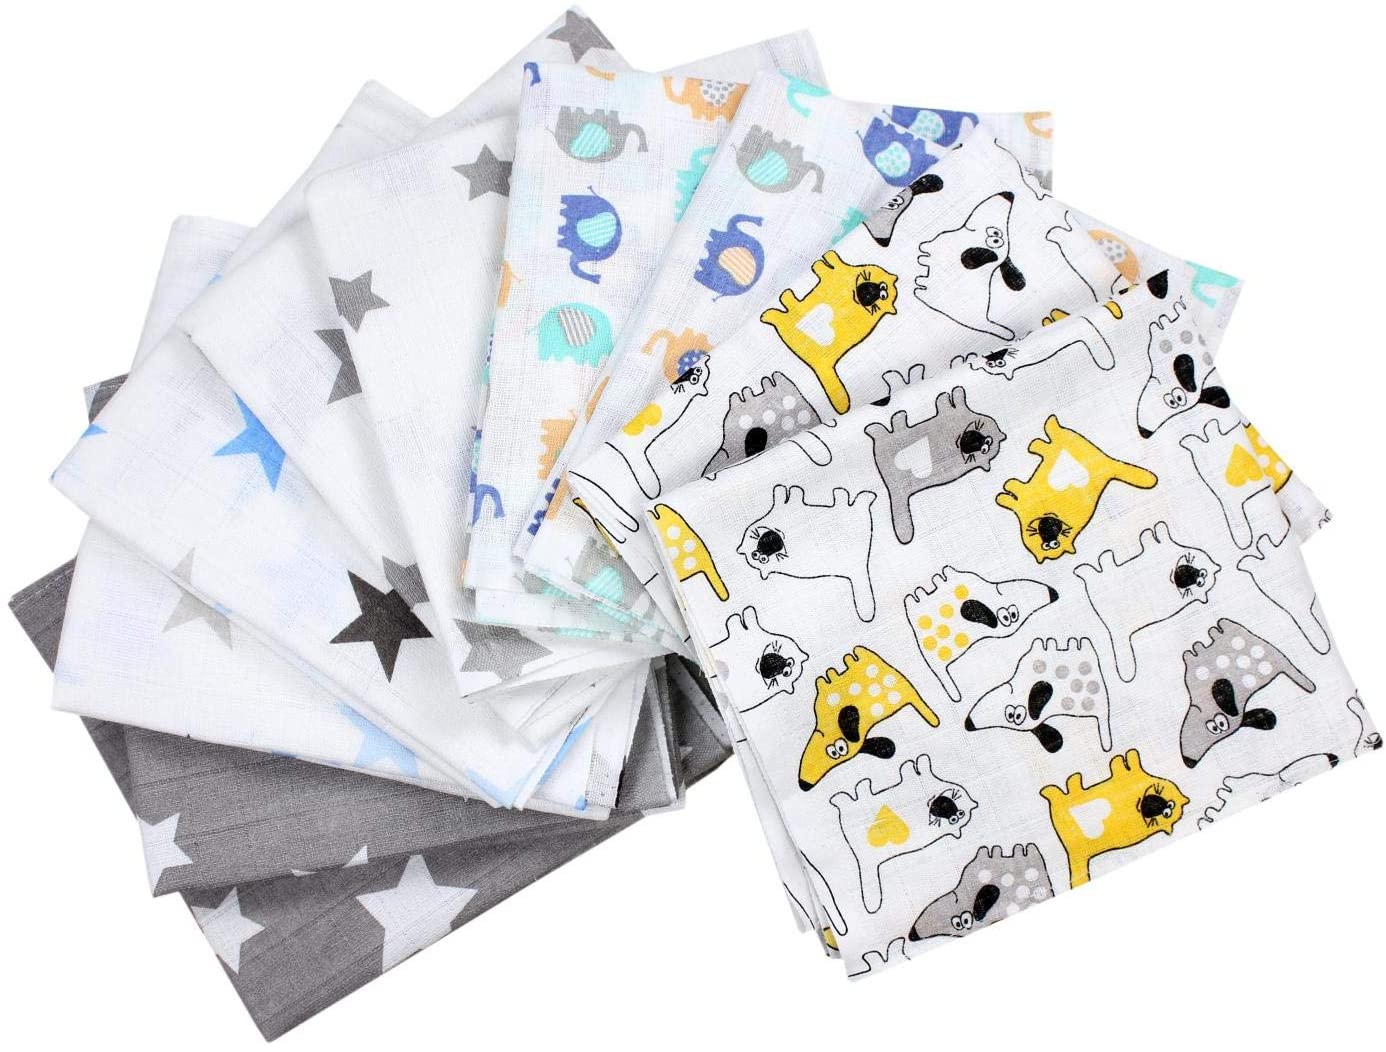 TupTam Baby Muslin Nappies Burp Cloths 70 x 80 cm Pack of 5 / 10 Colour Boy 4 Number of Pieces Pack of 10